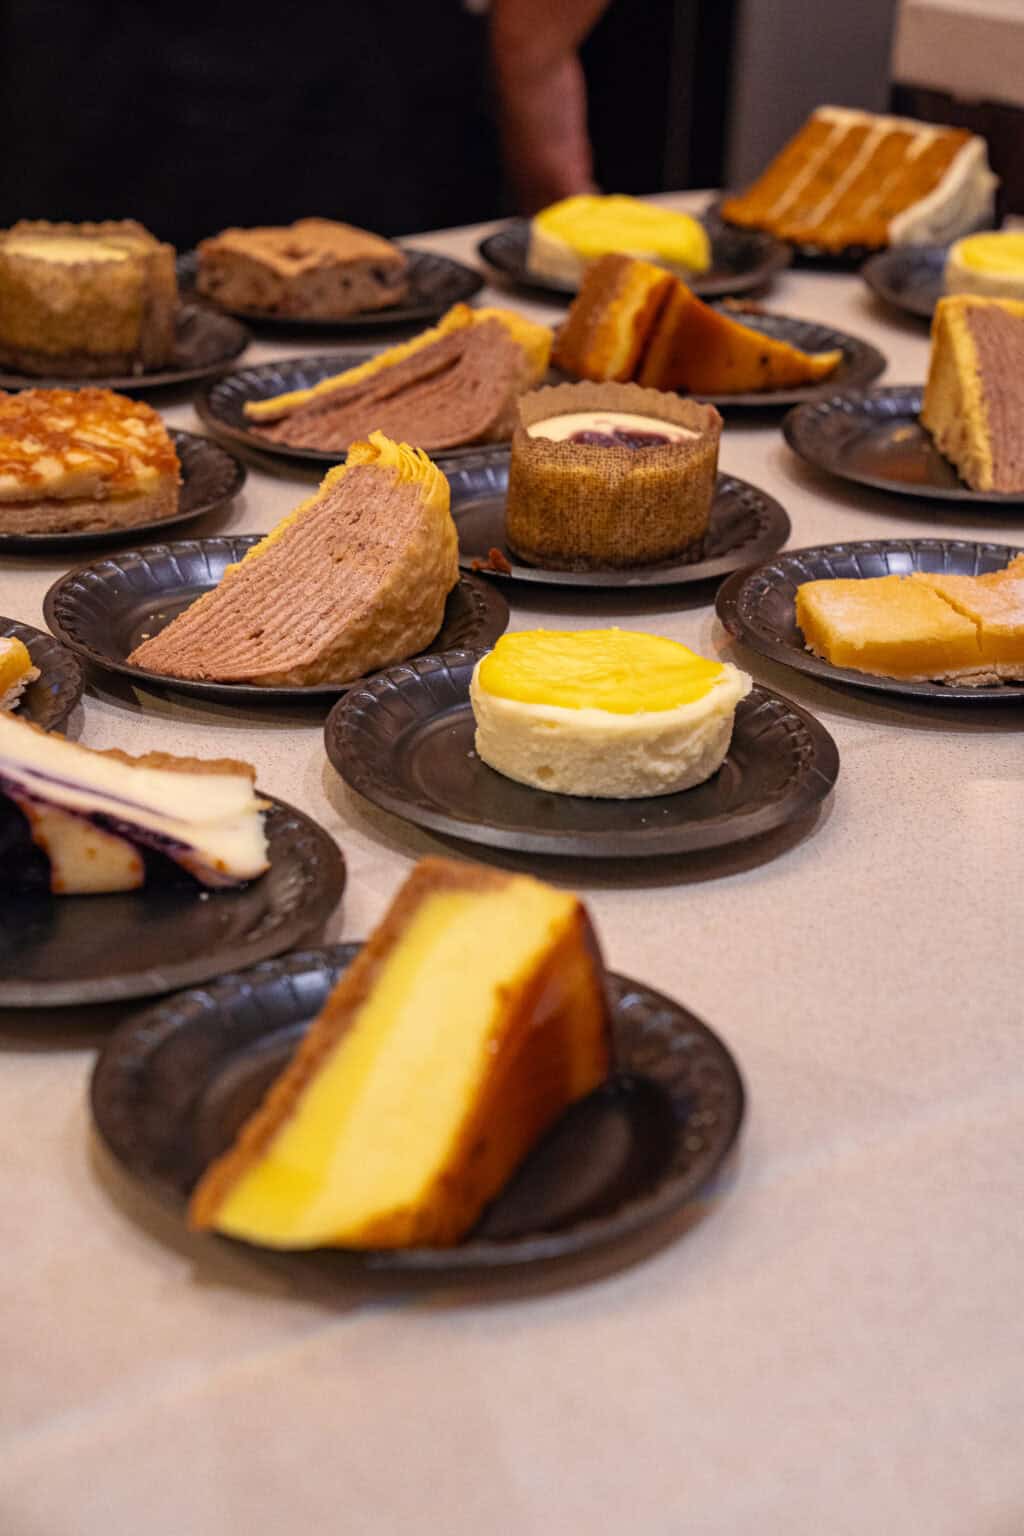 a table full of plates of desserts